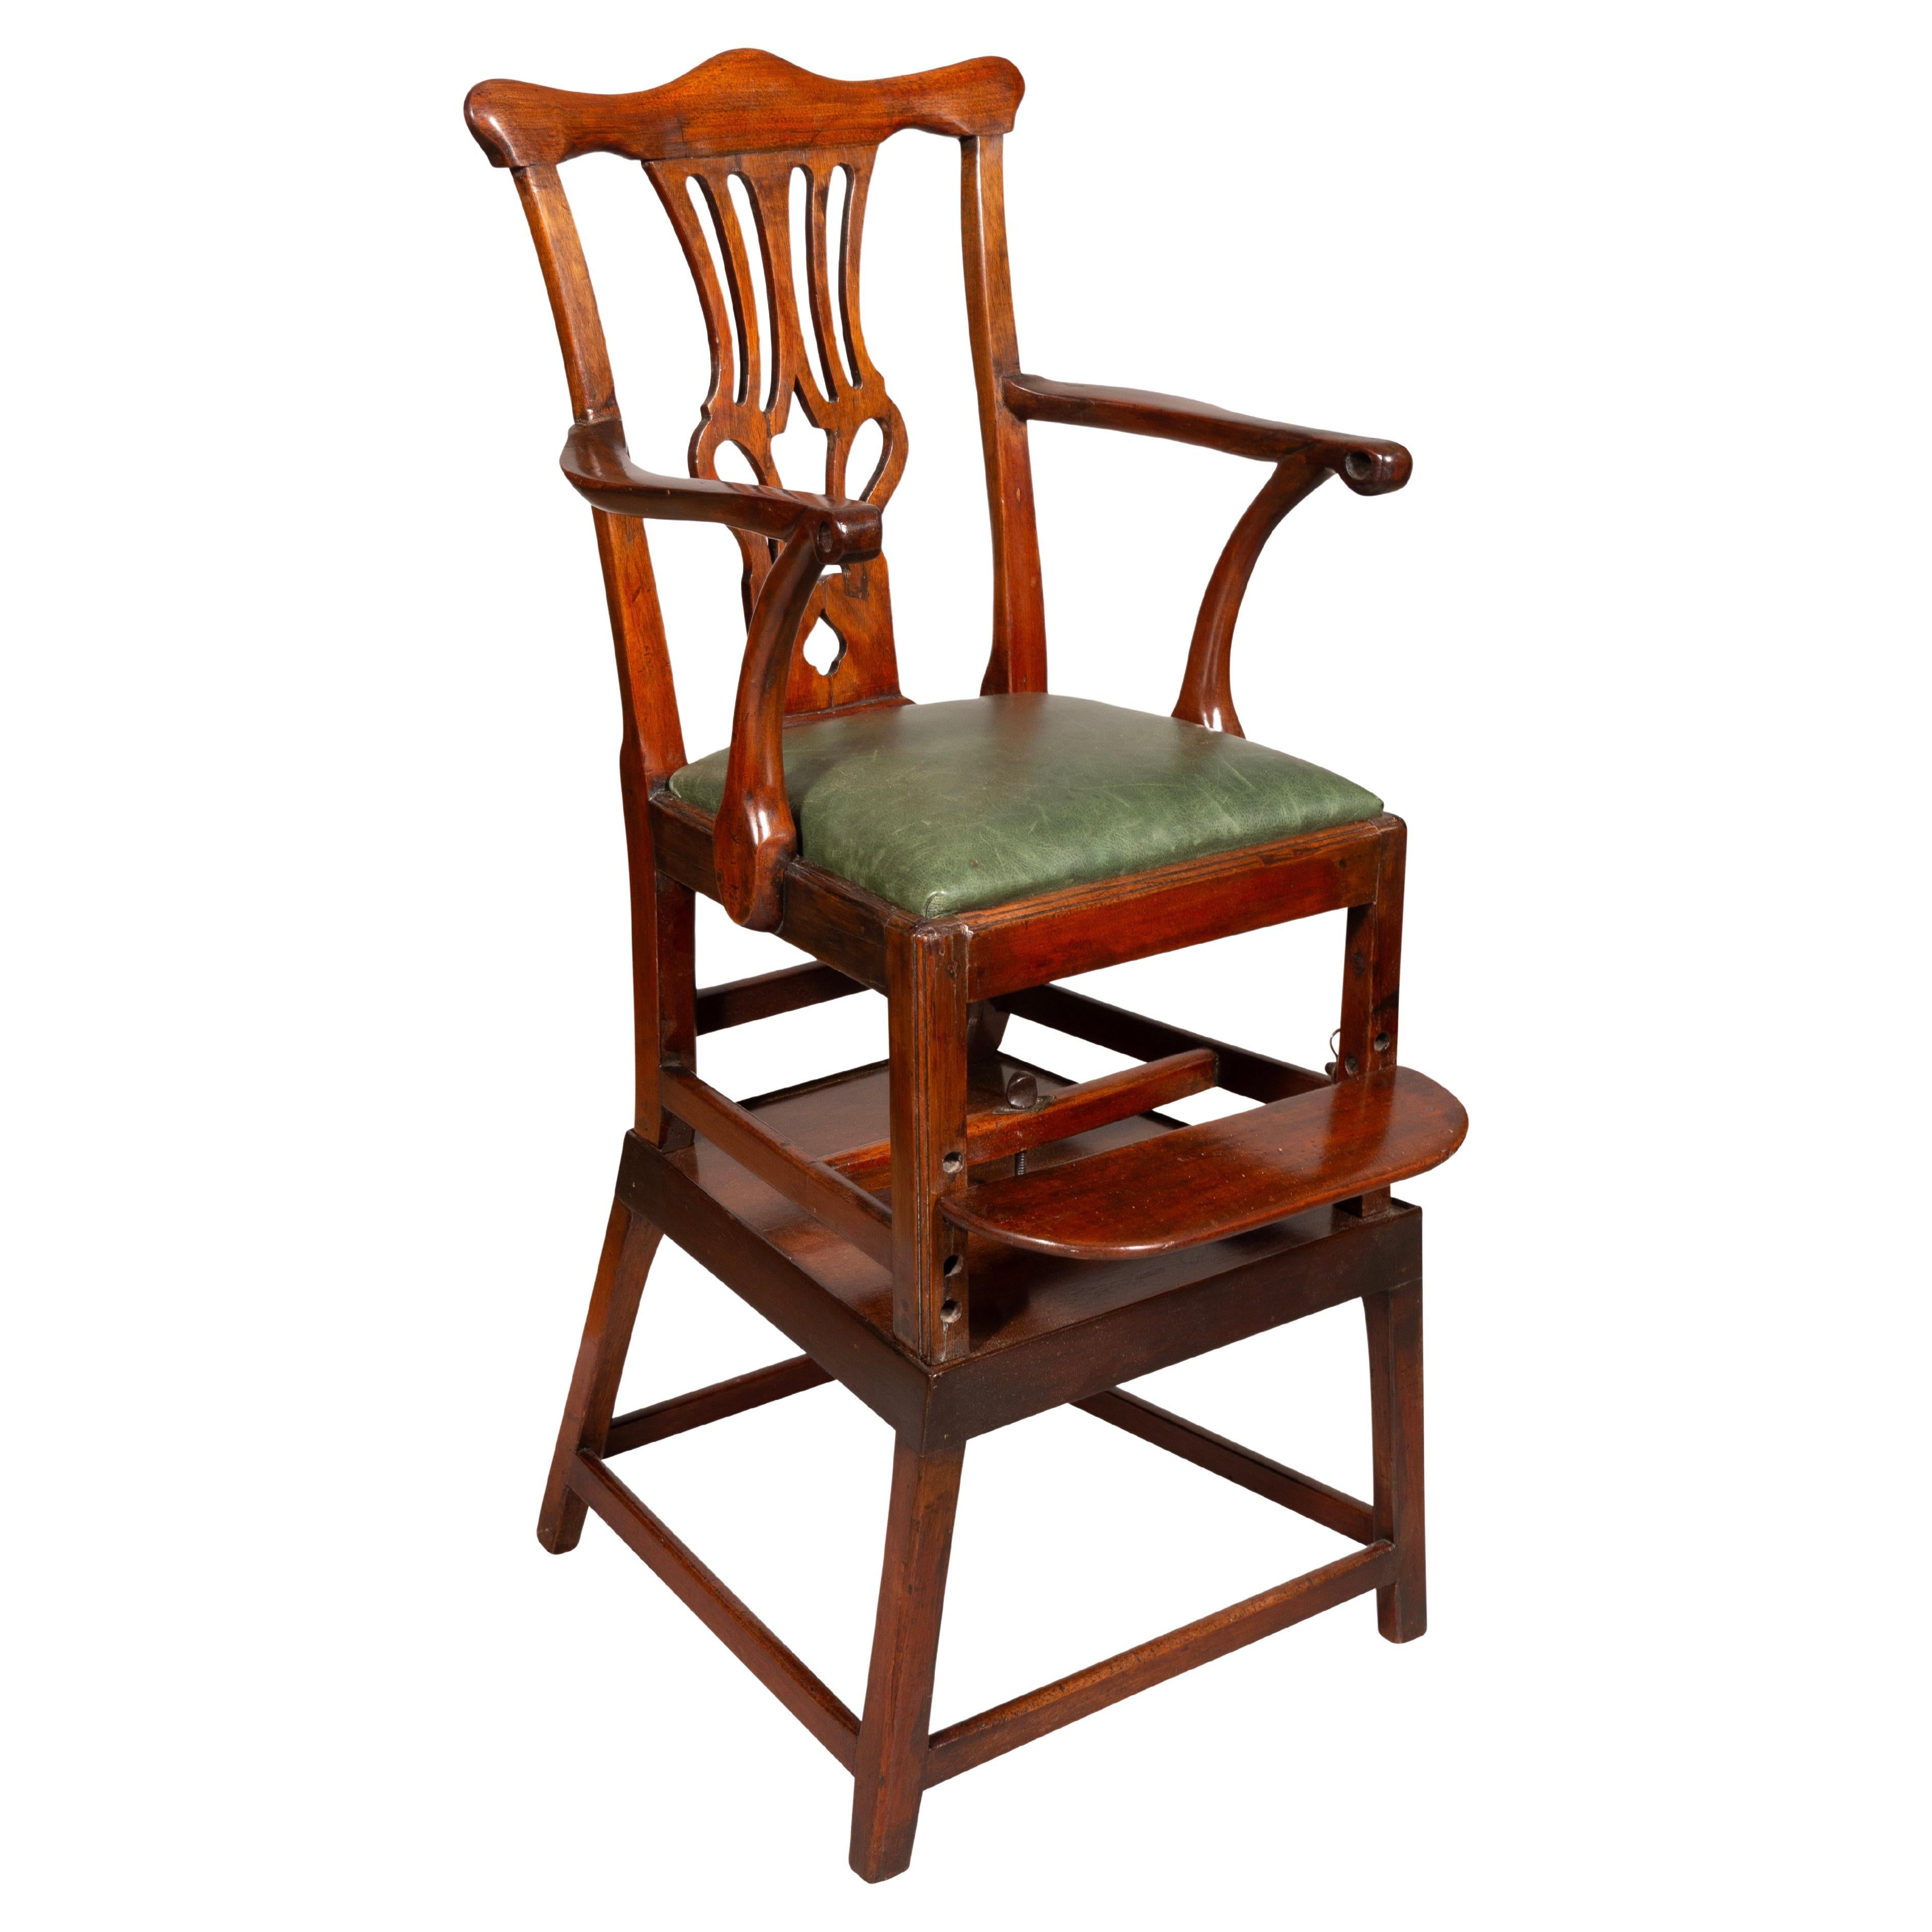 George III Mahogany Childs High Chair (chaise haute pour enfant)